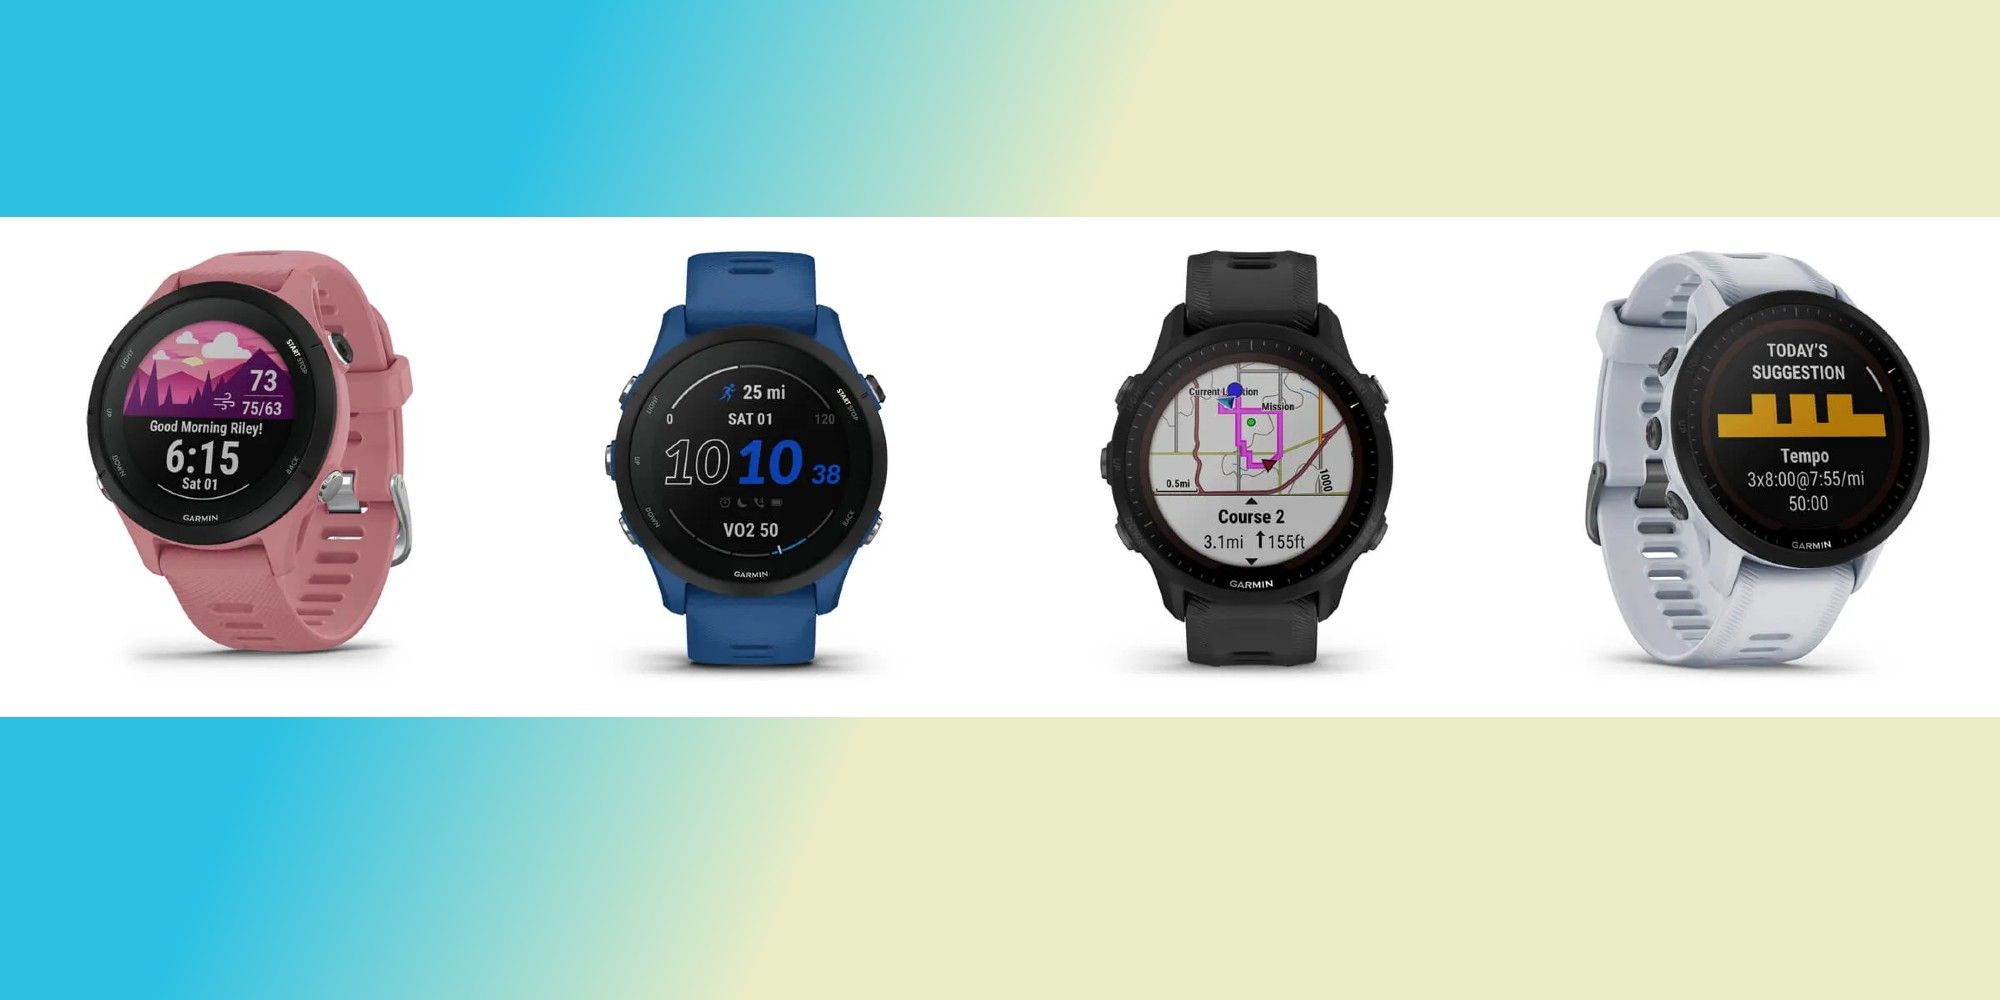 Garmin Forerunner 255 Vs. Forerunner 955: What Are The Differences?